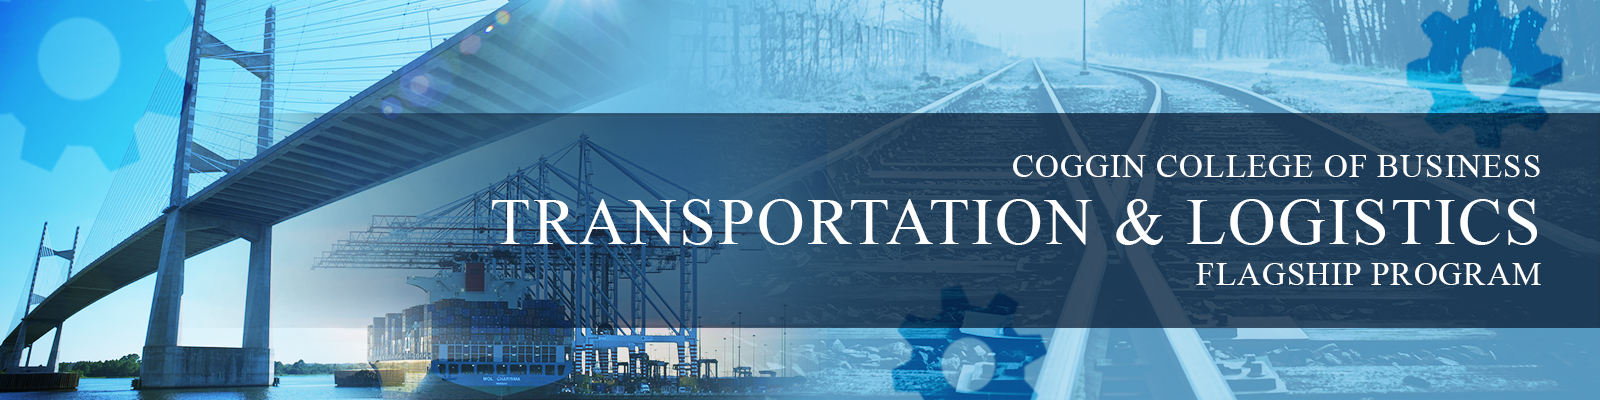 Coggin College Of Business Transportation and Logistics Flagship Program with bridge and railroad